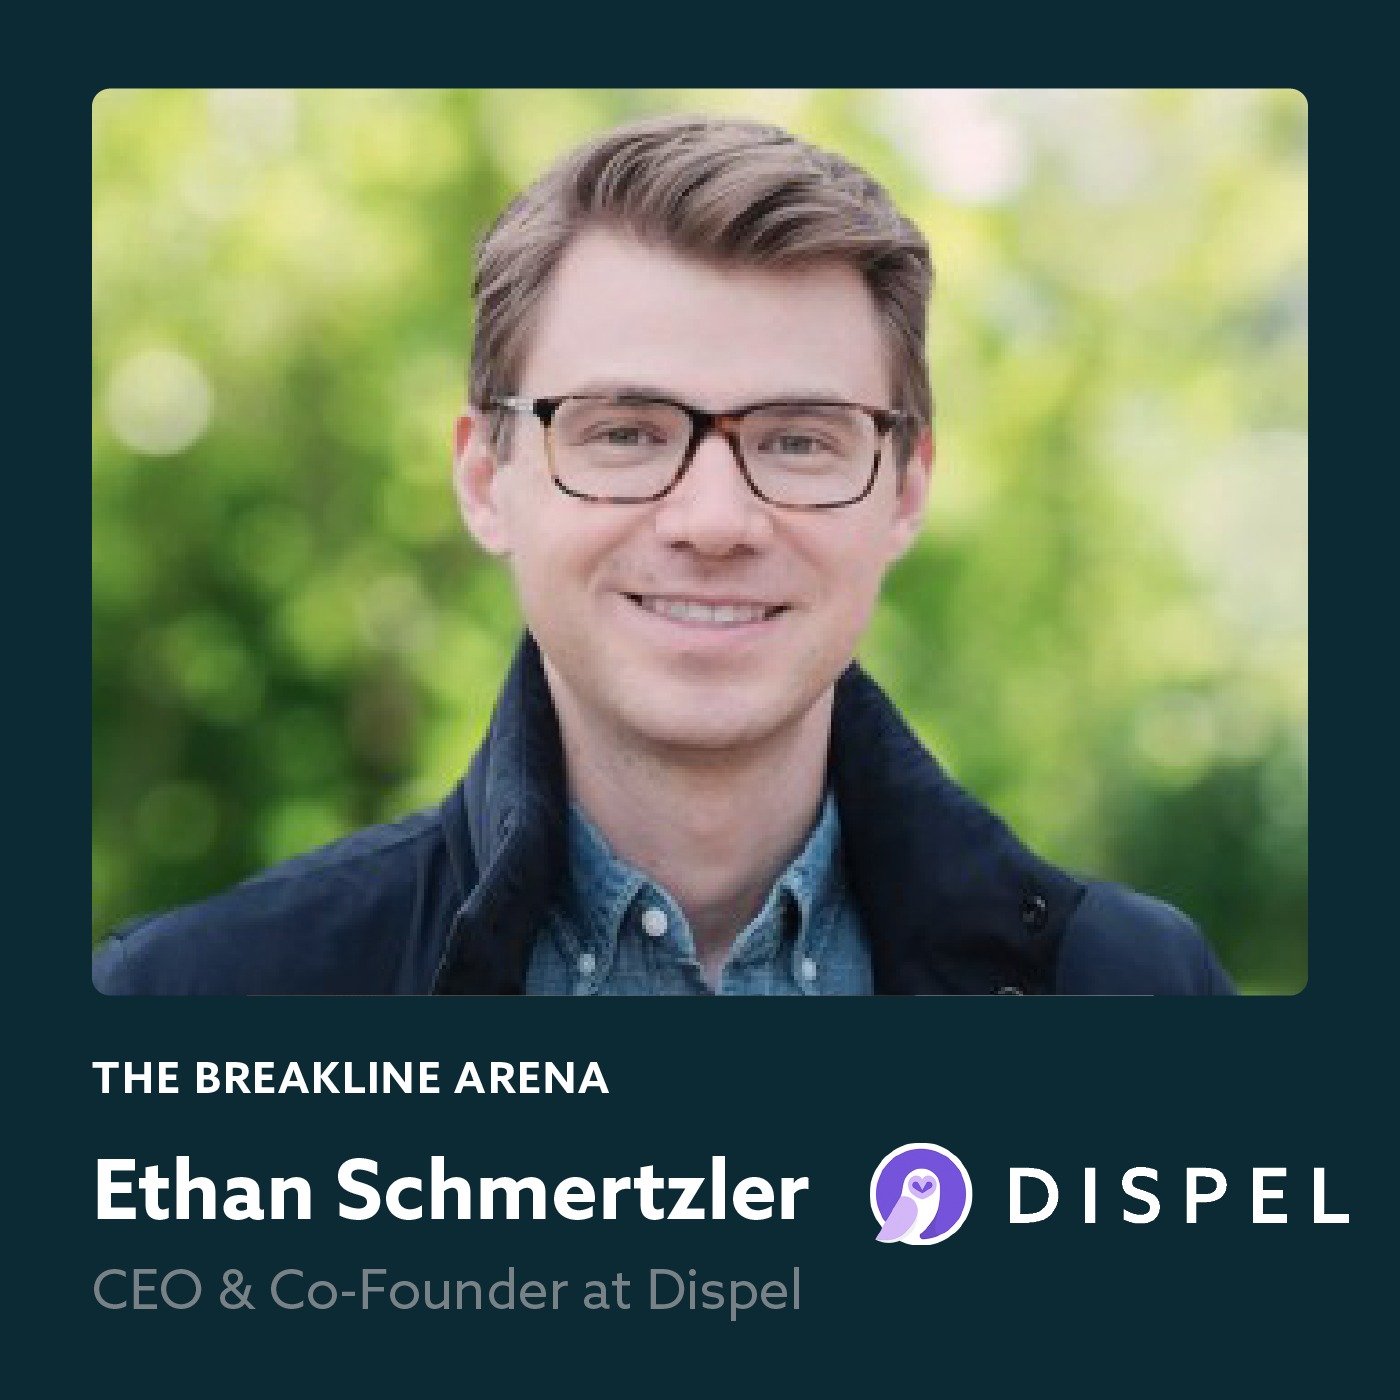 Ethan Schmertzler, Co-Founder and CEO of Dispel | Good Expedition Behavior in the Business of Moving Targets